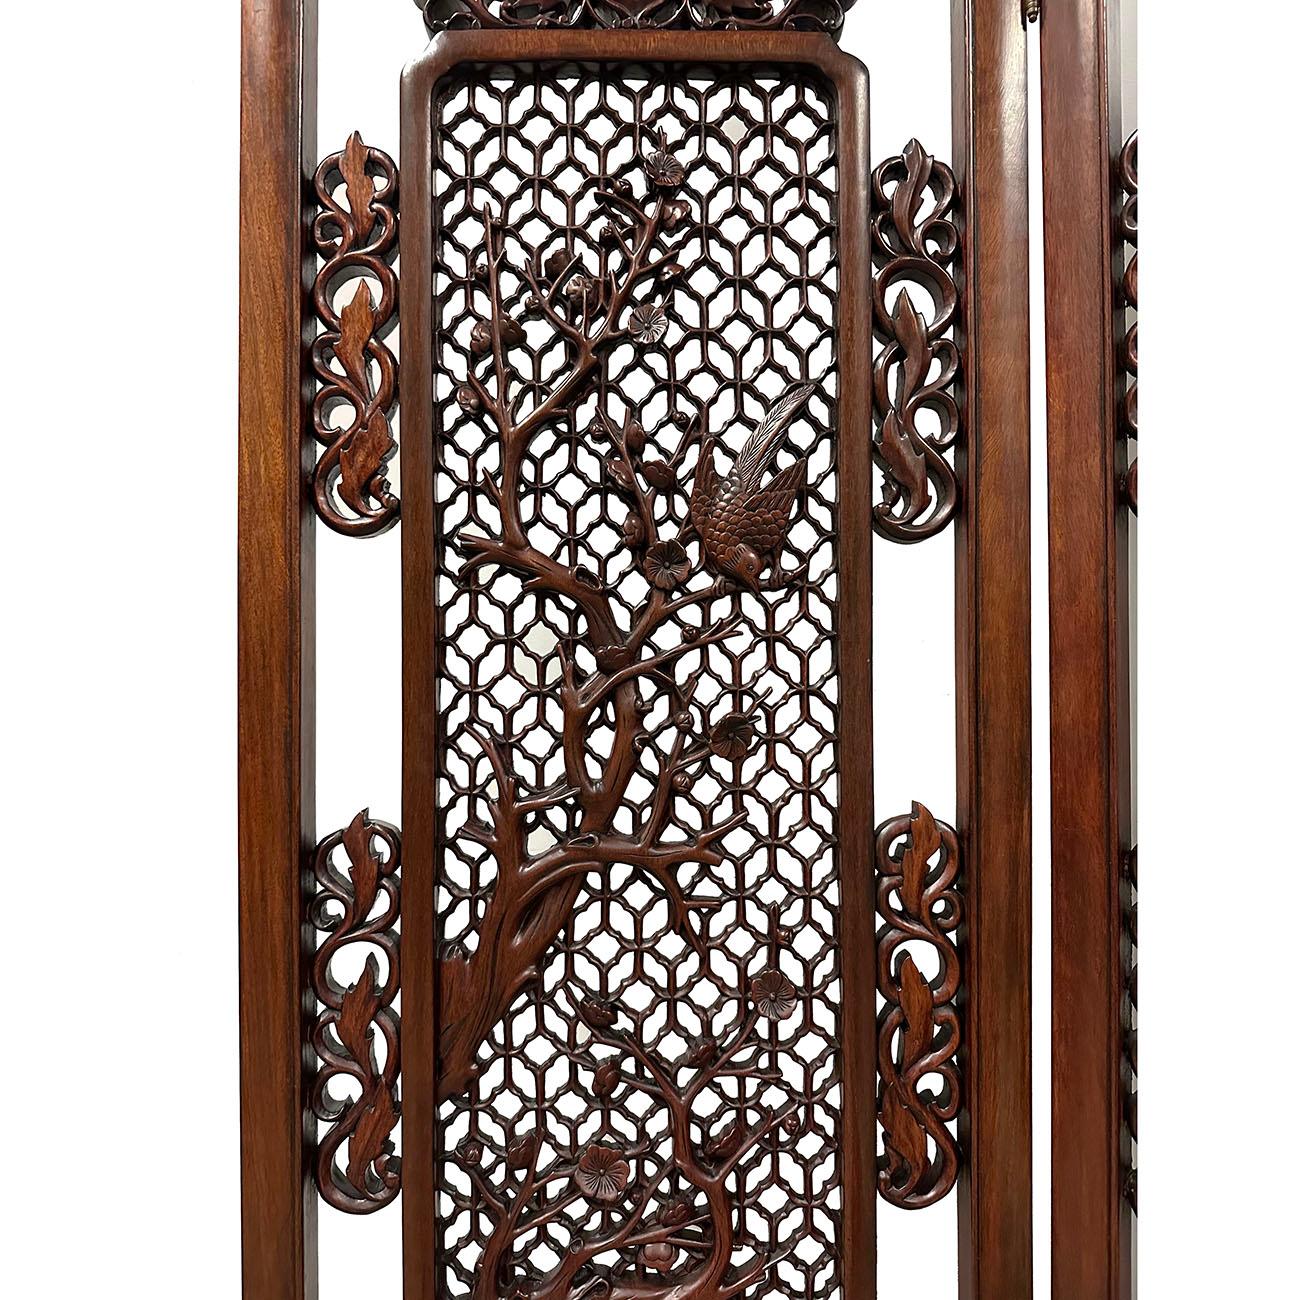 Chinese Export Mid-20th Century Chinese Rosewood Open Carved Screen/Room Divider For Sale